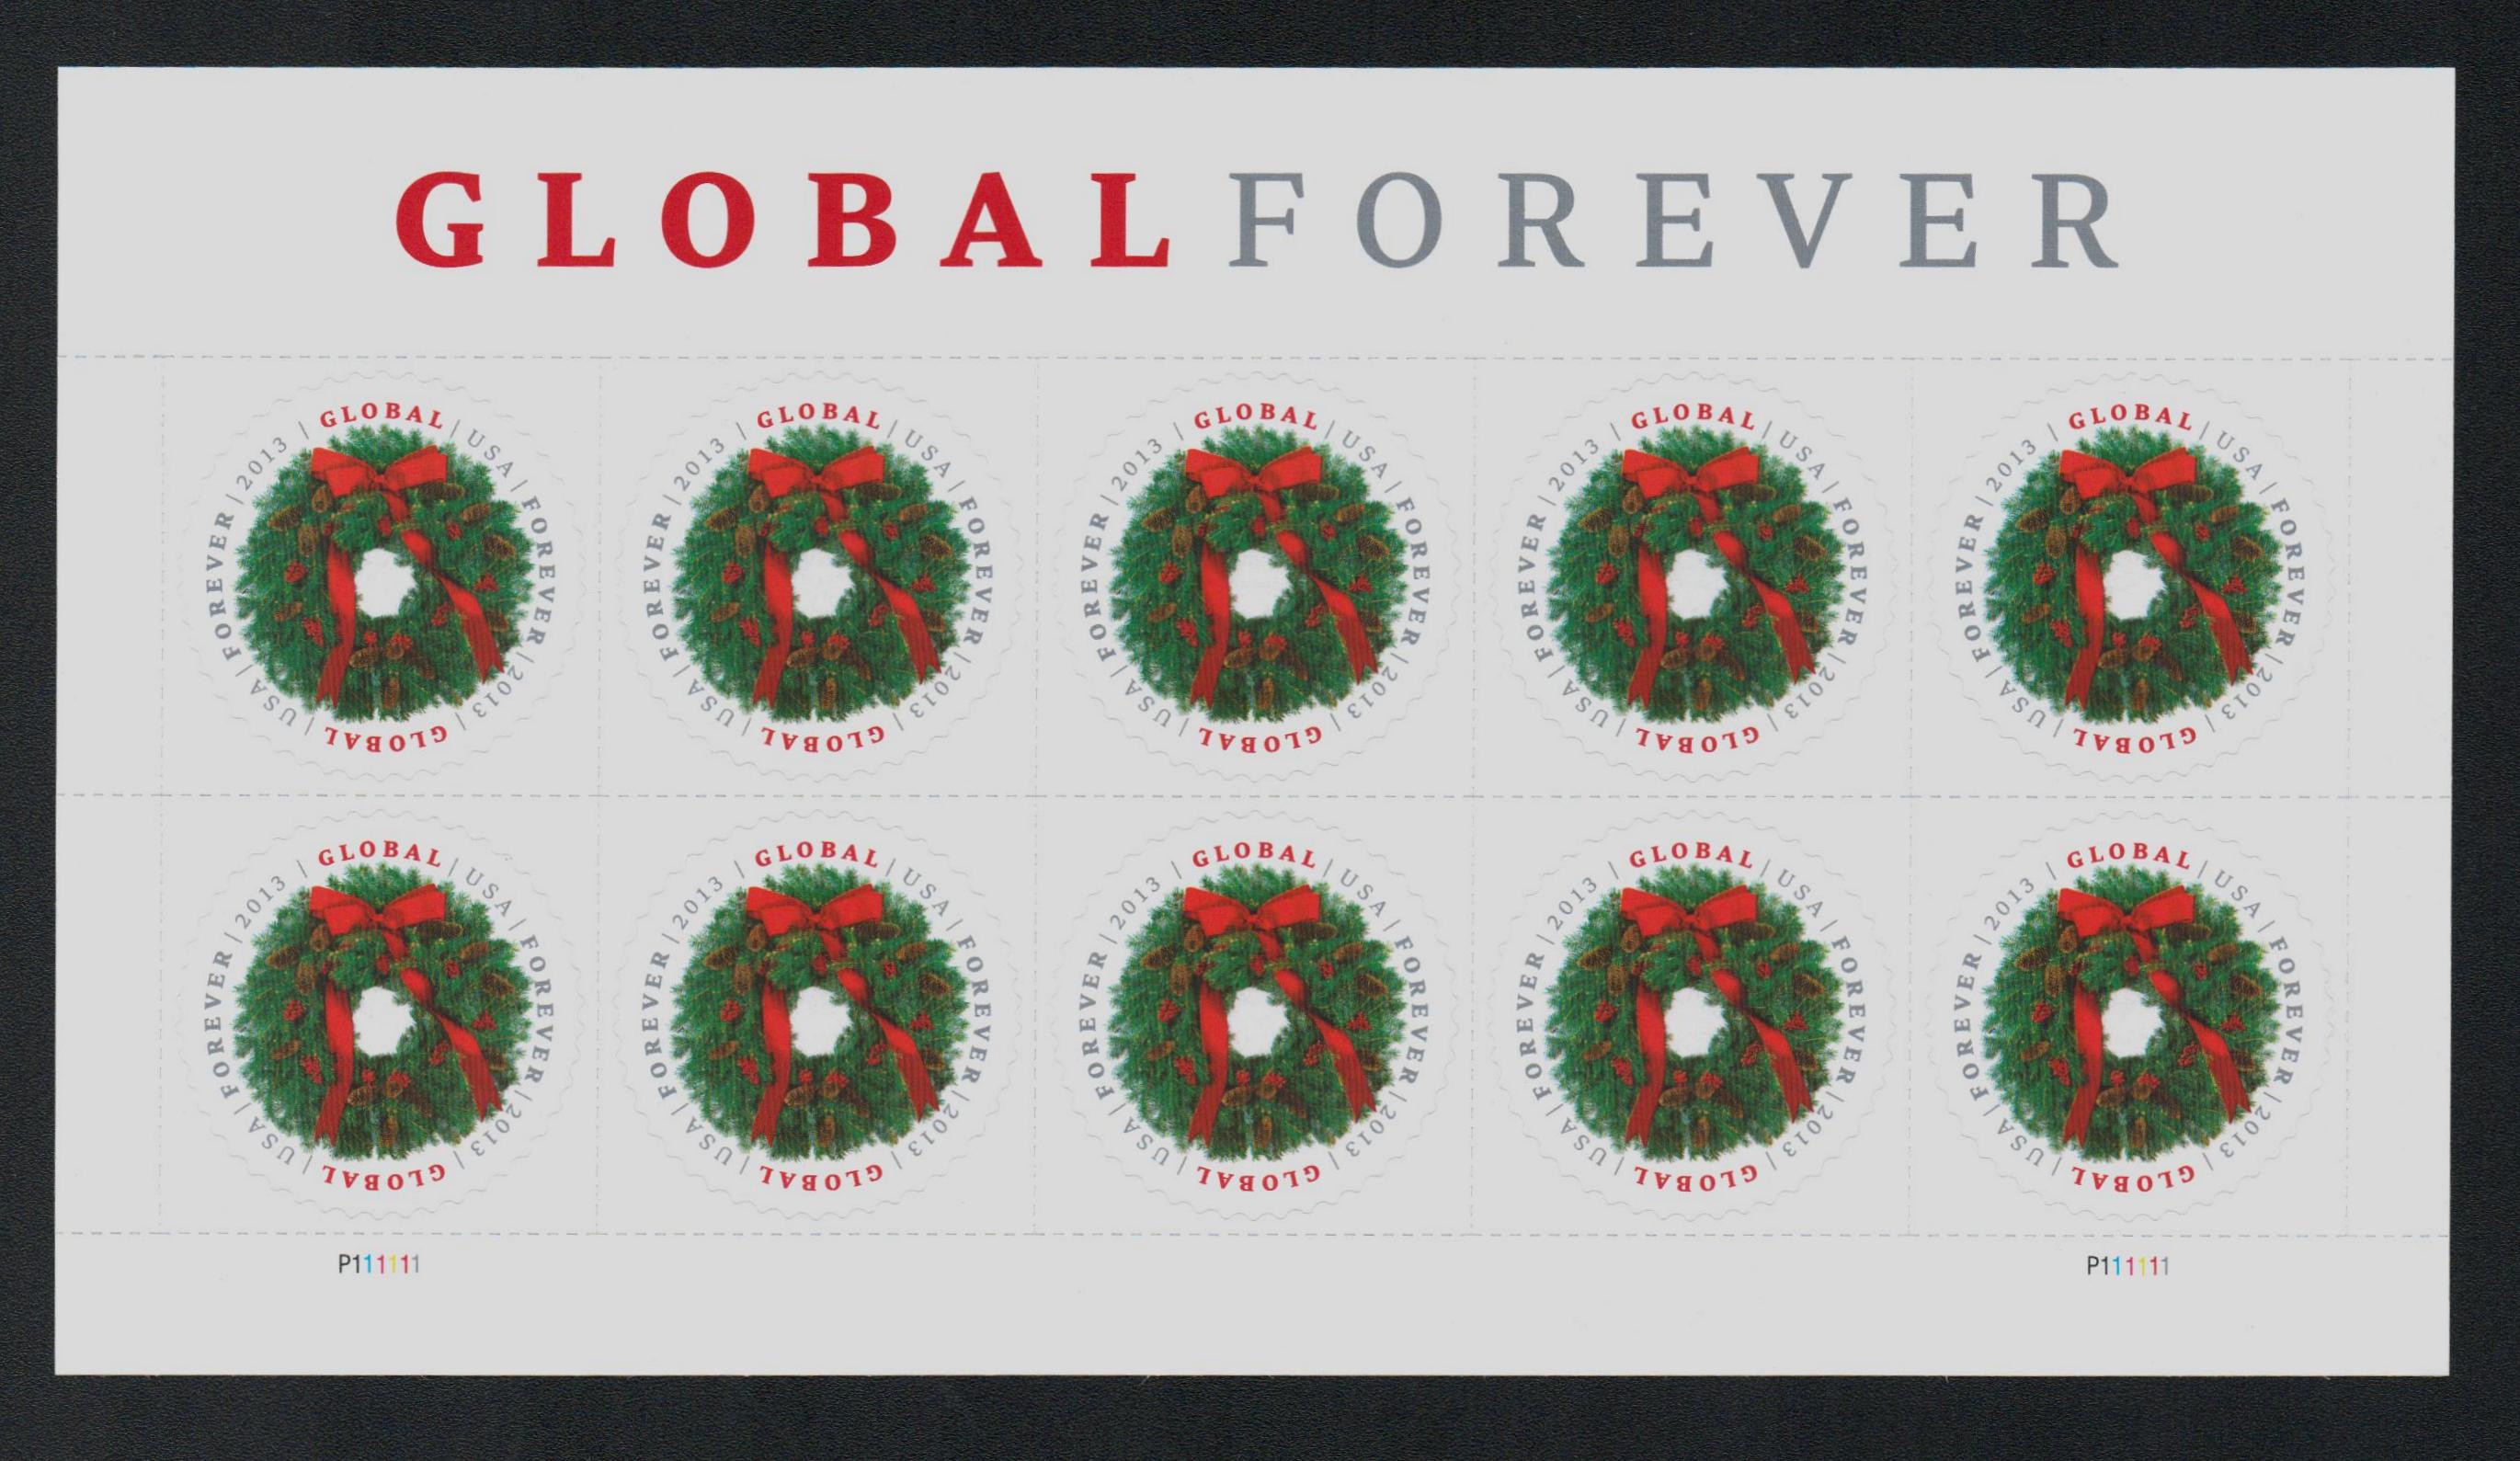 4936 PB - 2014 Global Forever Stamp - Silver Bells Wreath - Mystic